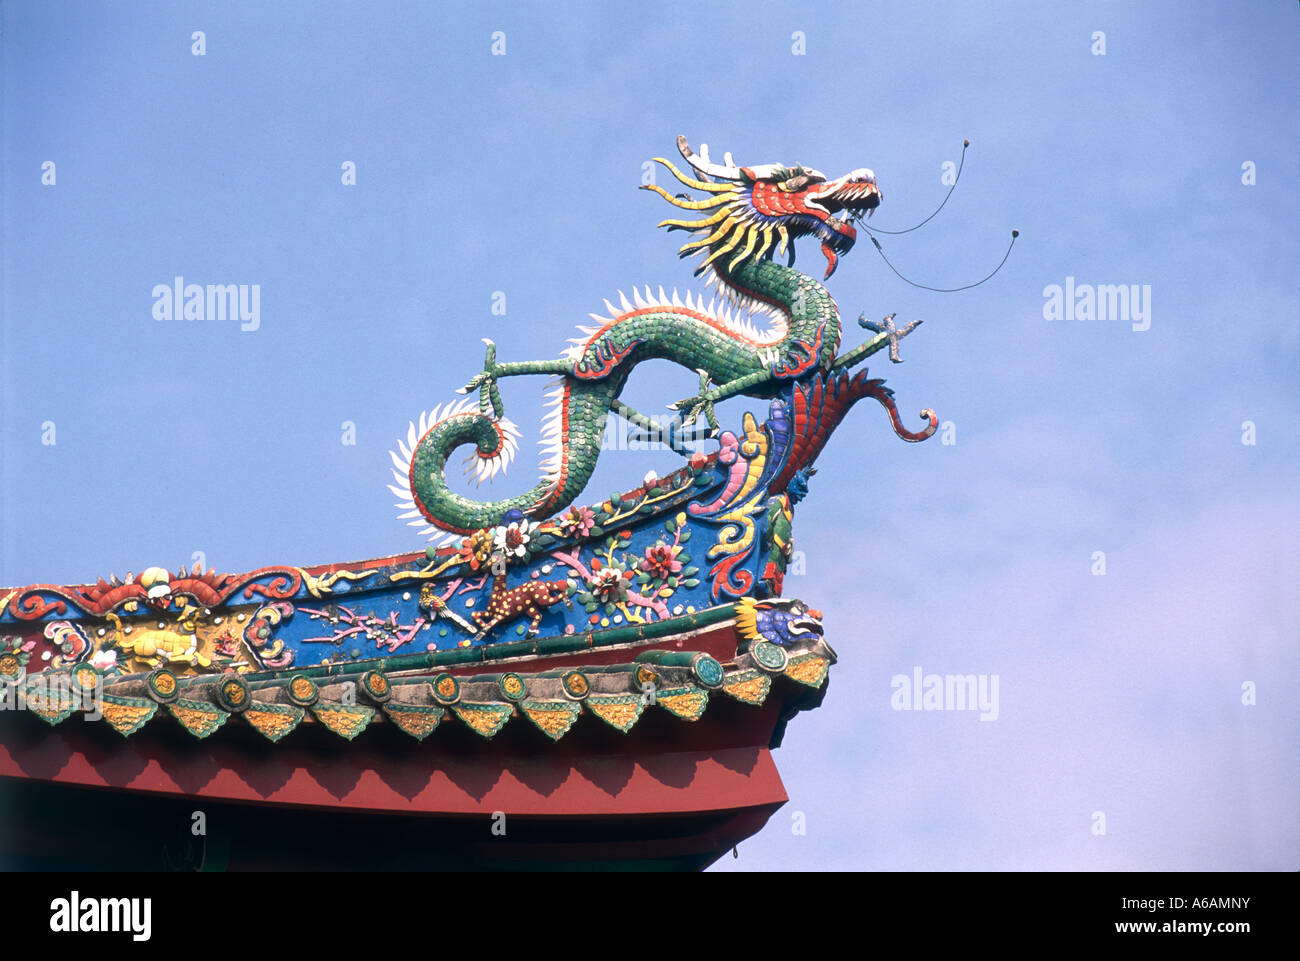 China, Fujian, Xiamen, Nan Putuo Si, colorful and decorated rooftop dragon on eave of active Buddhist temple Stock Photo